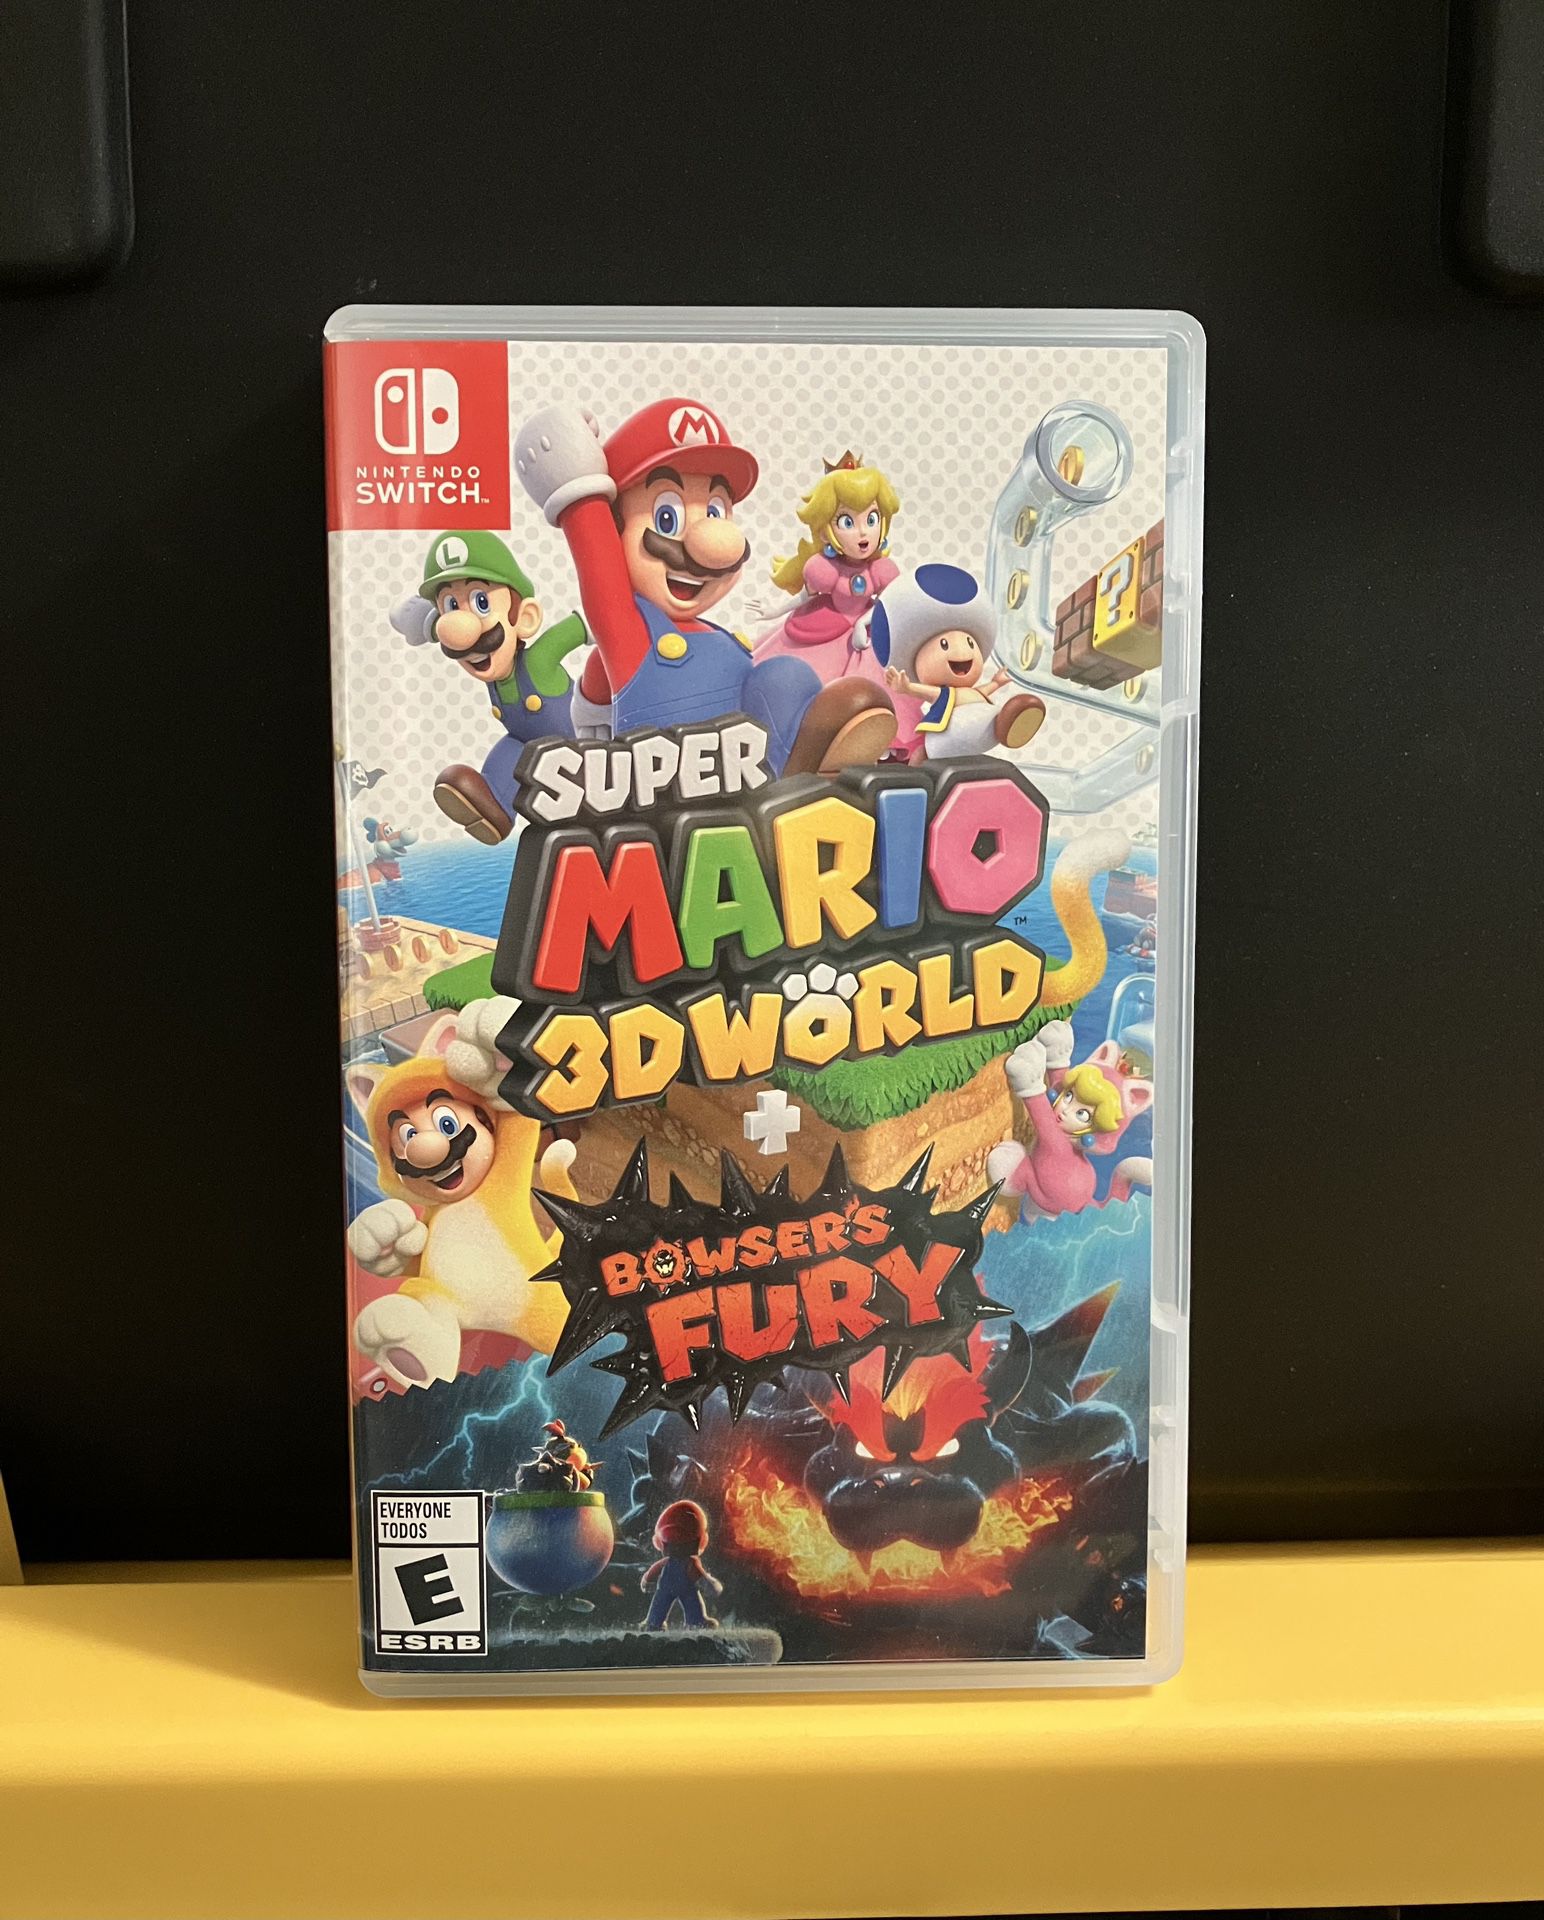 Super Mario 3D Worlds + Bowser's Fury for Nintendo Switch video game console system world Bros Lite Oled Complete